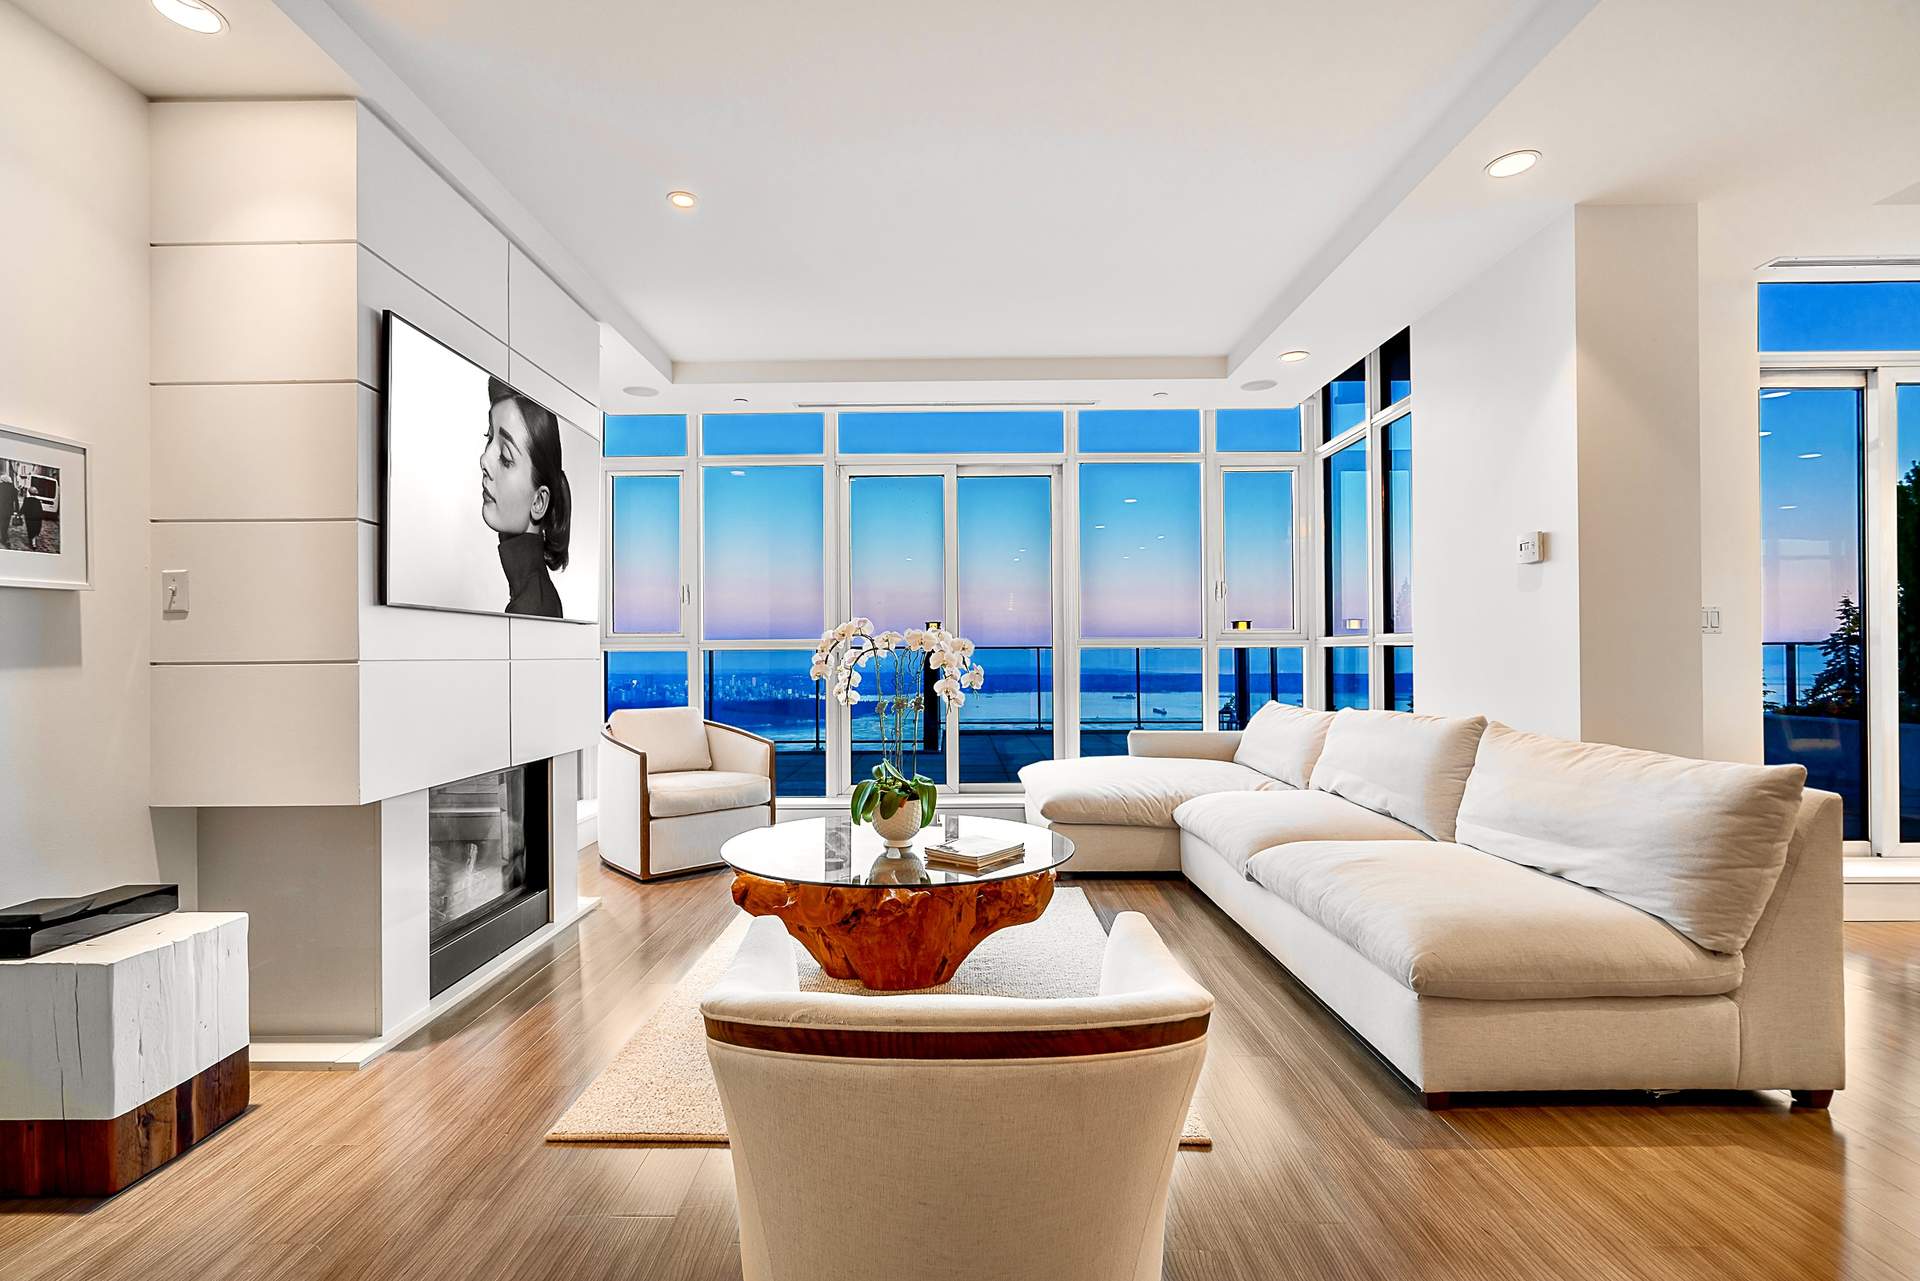 Sub-Penthouse at Twin Creeks by Quigg offering Spectacular Ocean and City Views